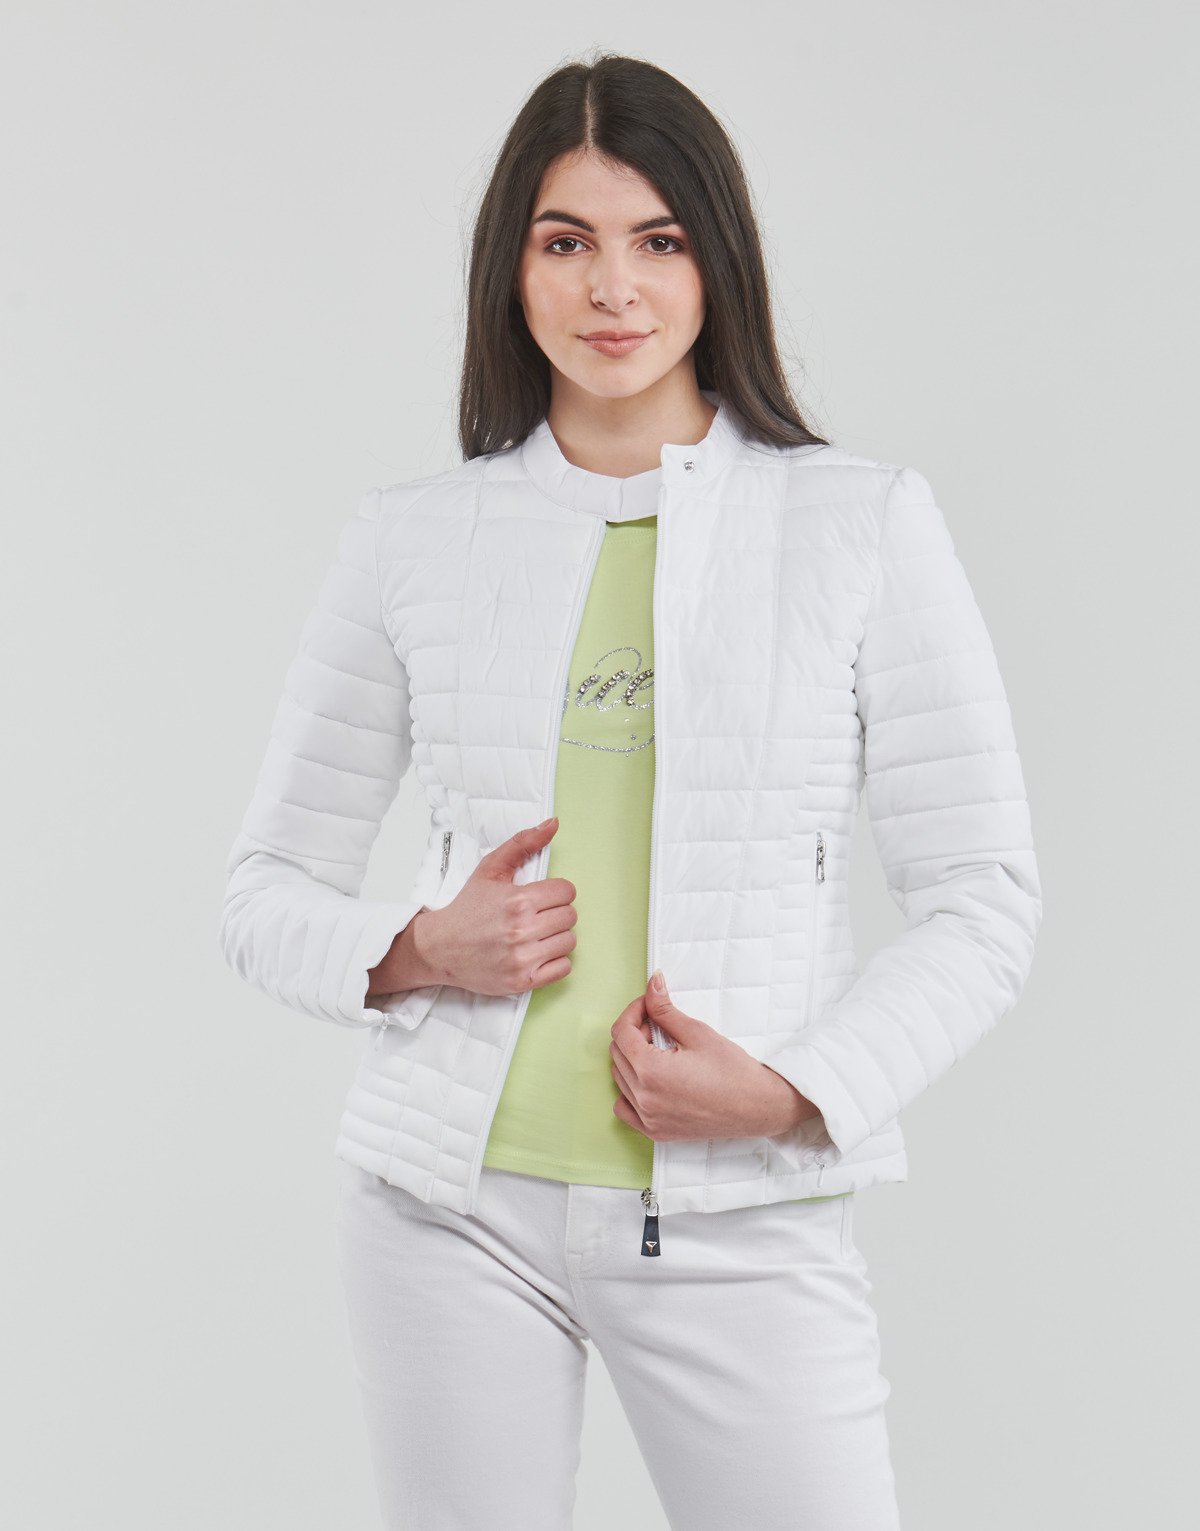 Guess Blanc VONA JACKET Dh5a78We